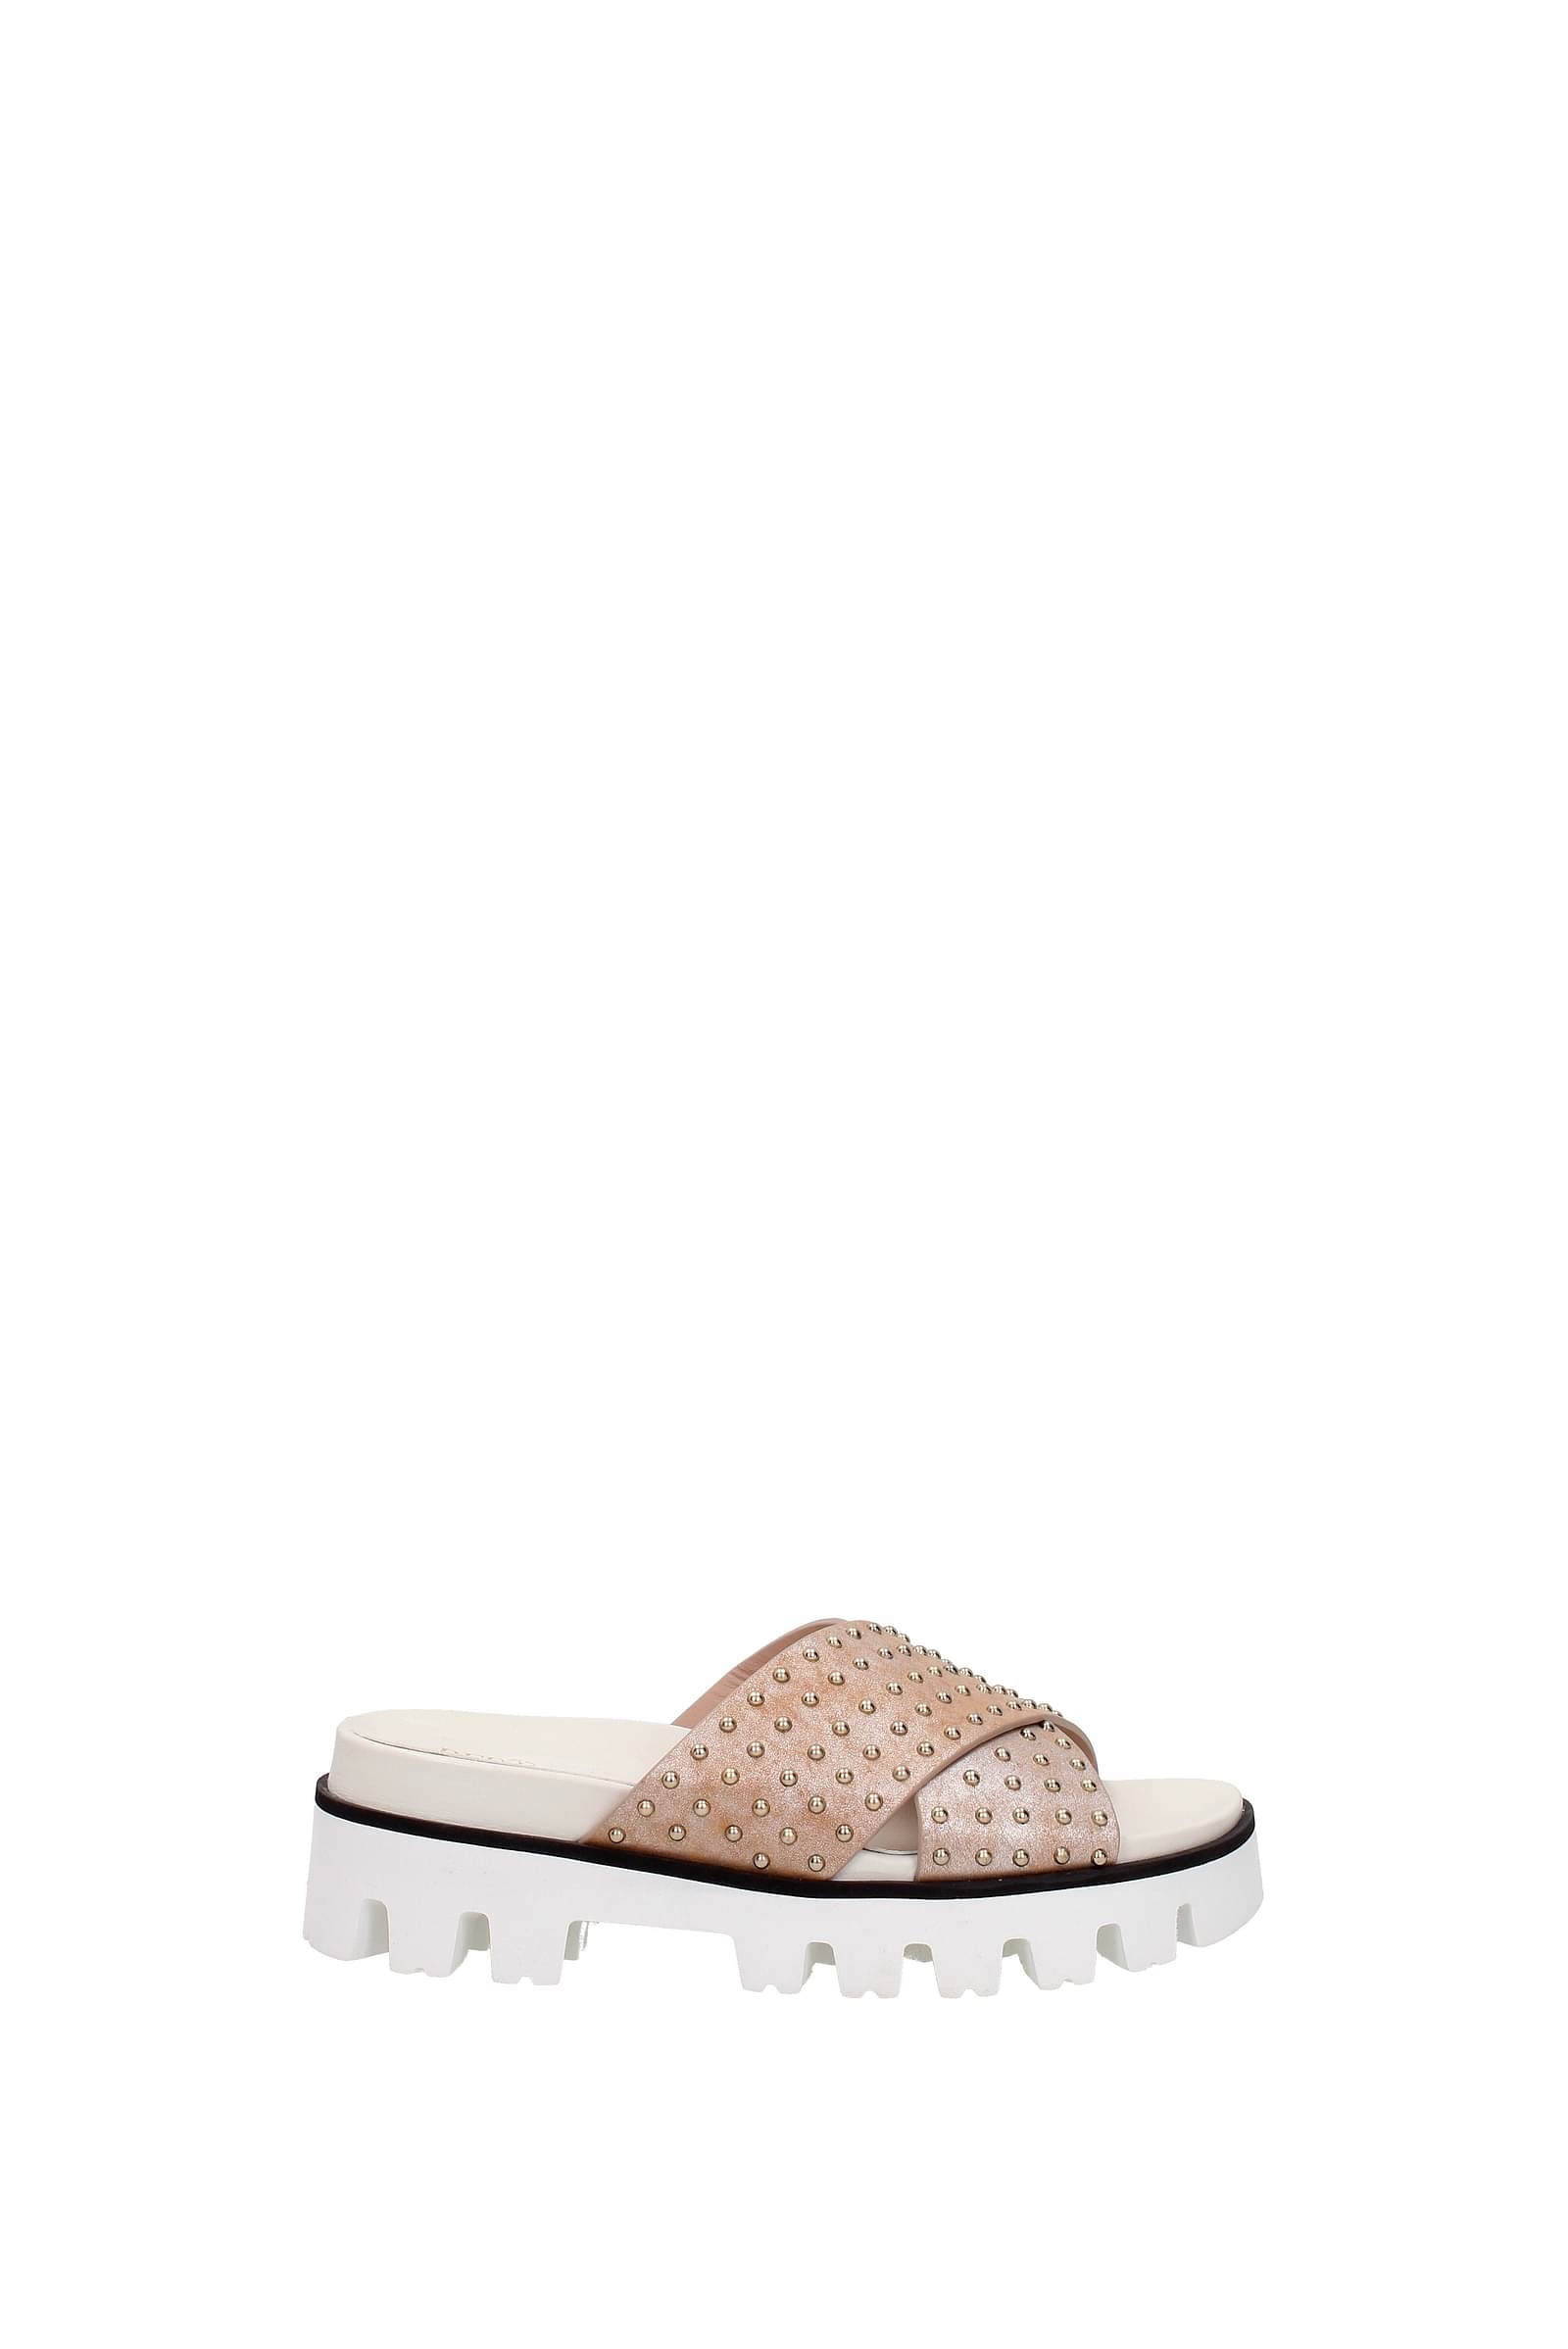 red valentino slippers